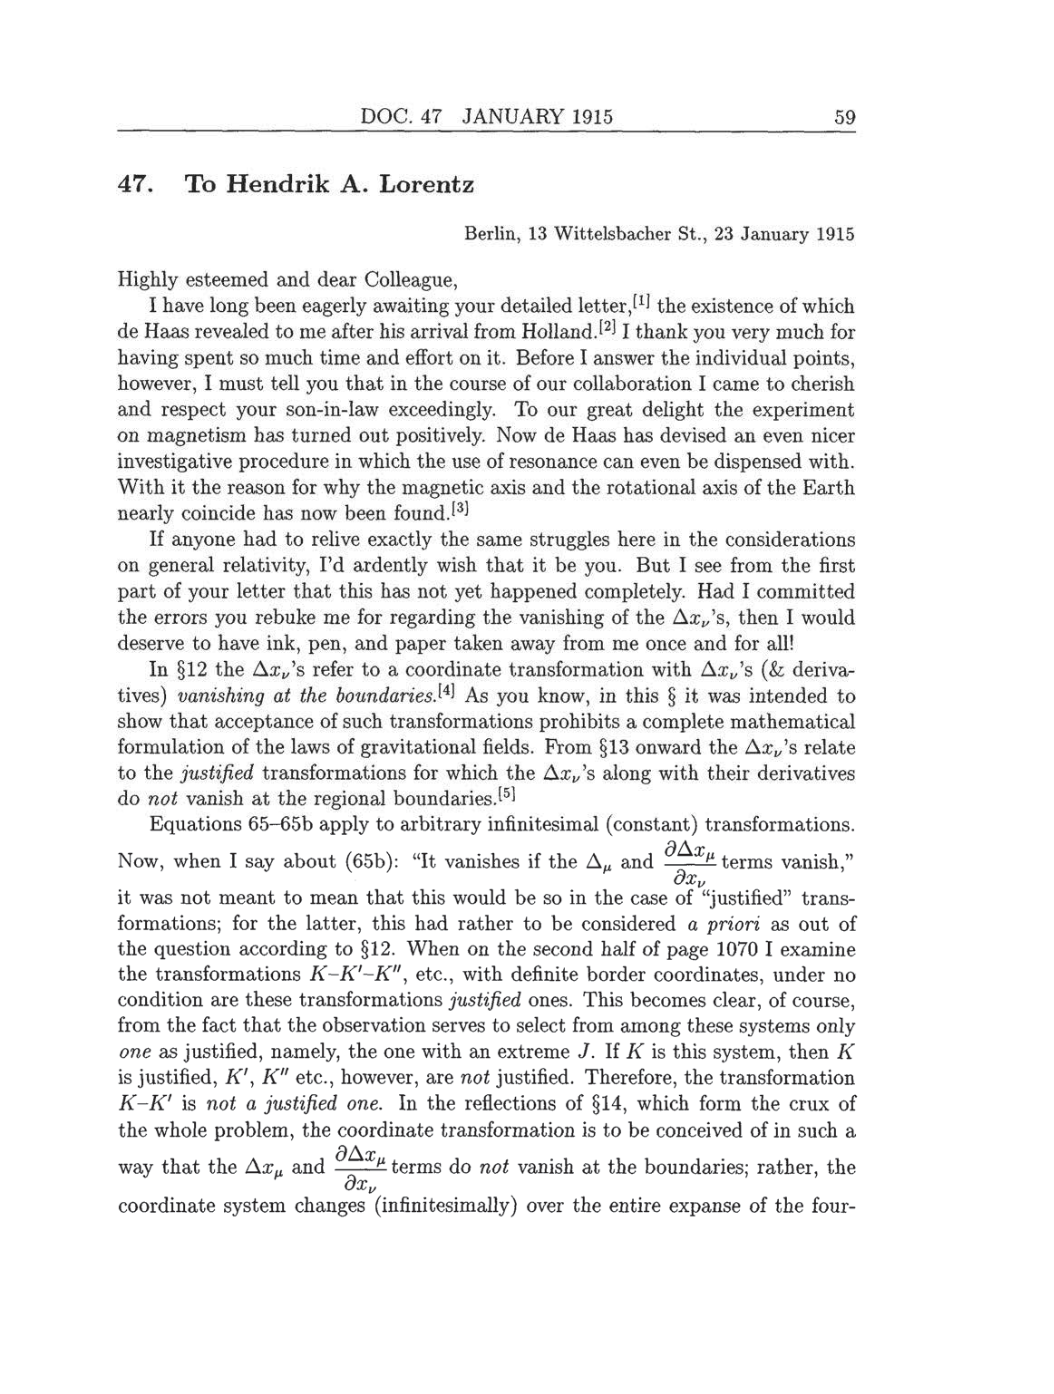 Volume 8: The Berlin Years: Correspondence, 1914-1918 (English translation supplement) page 59